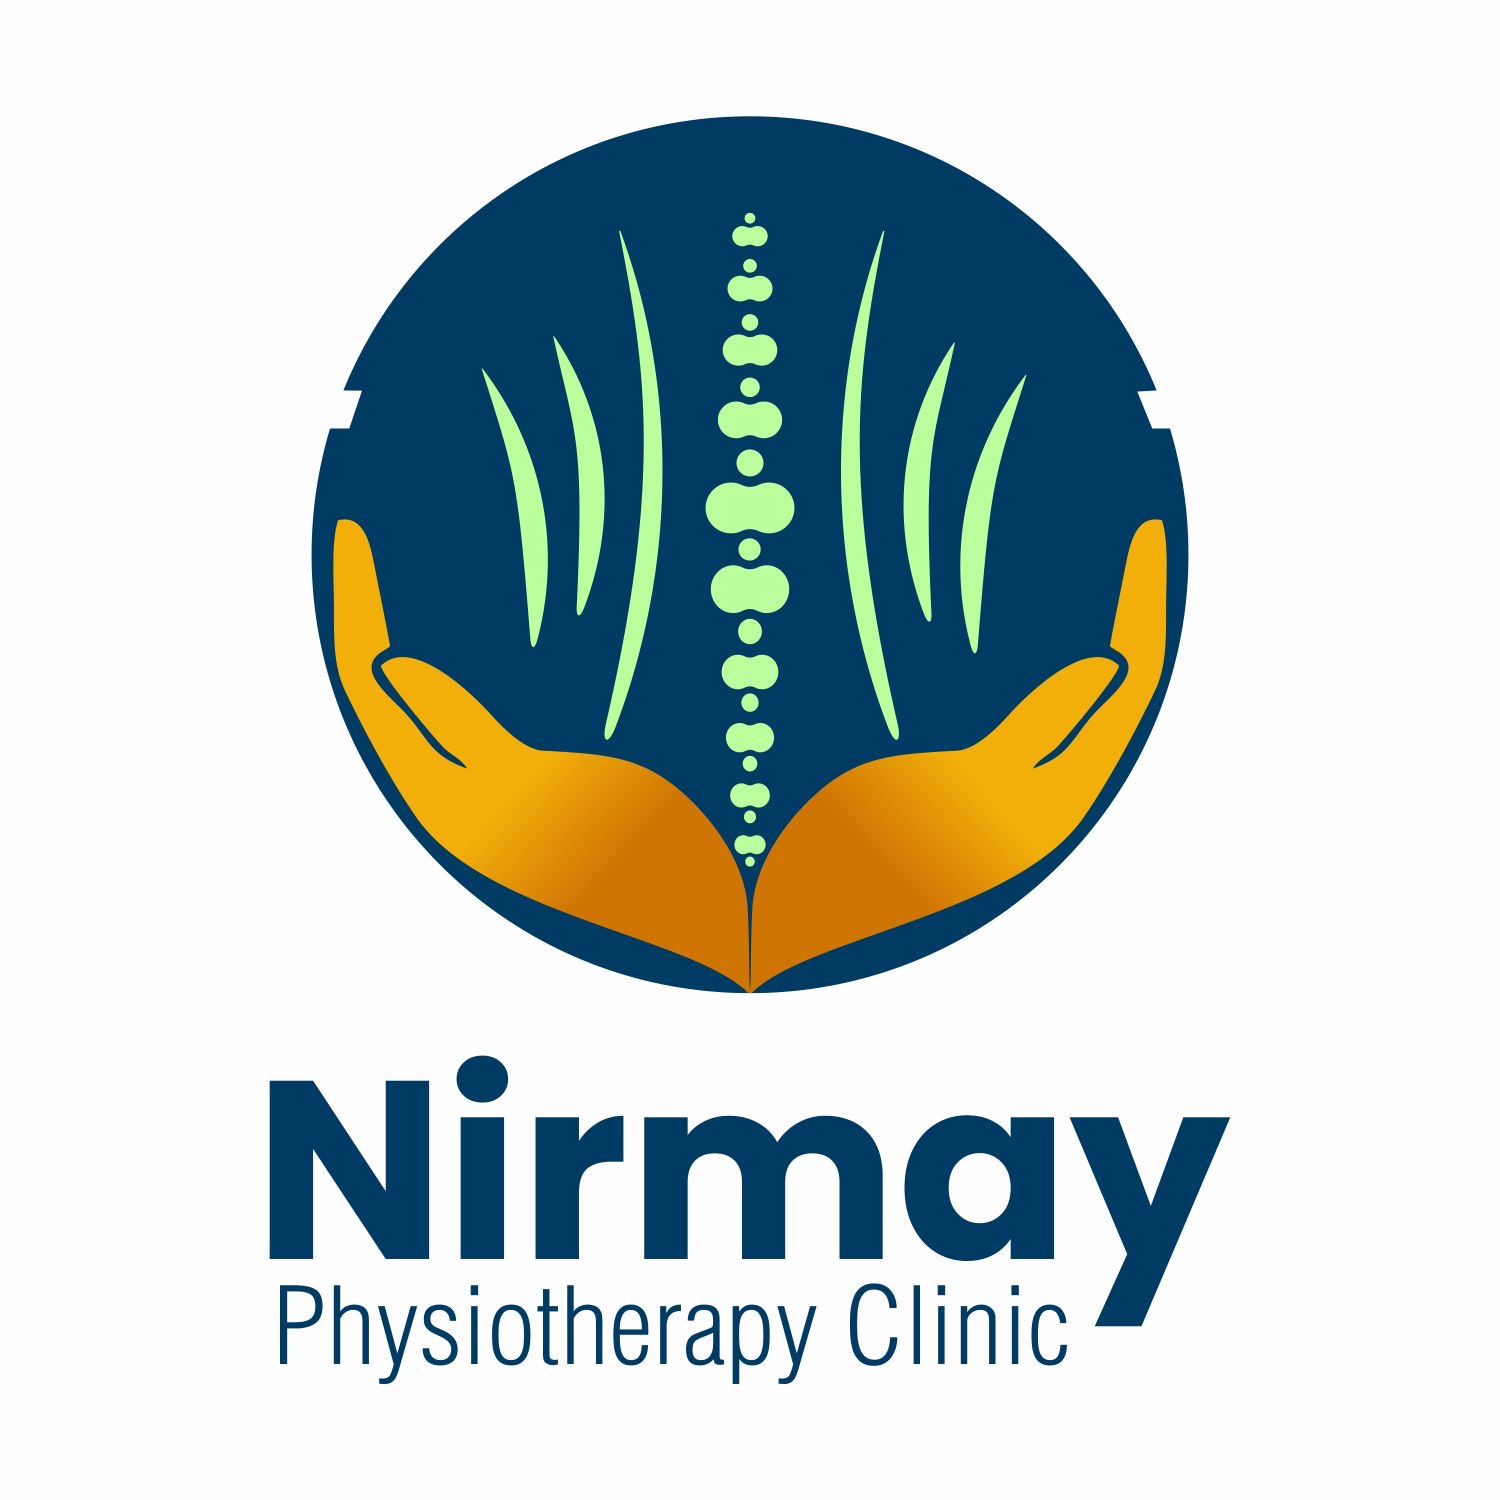 Nirmay Physiotherapy Clinic